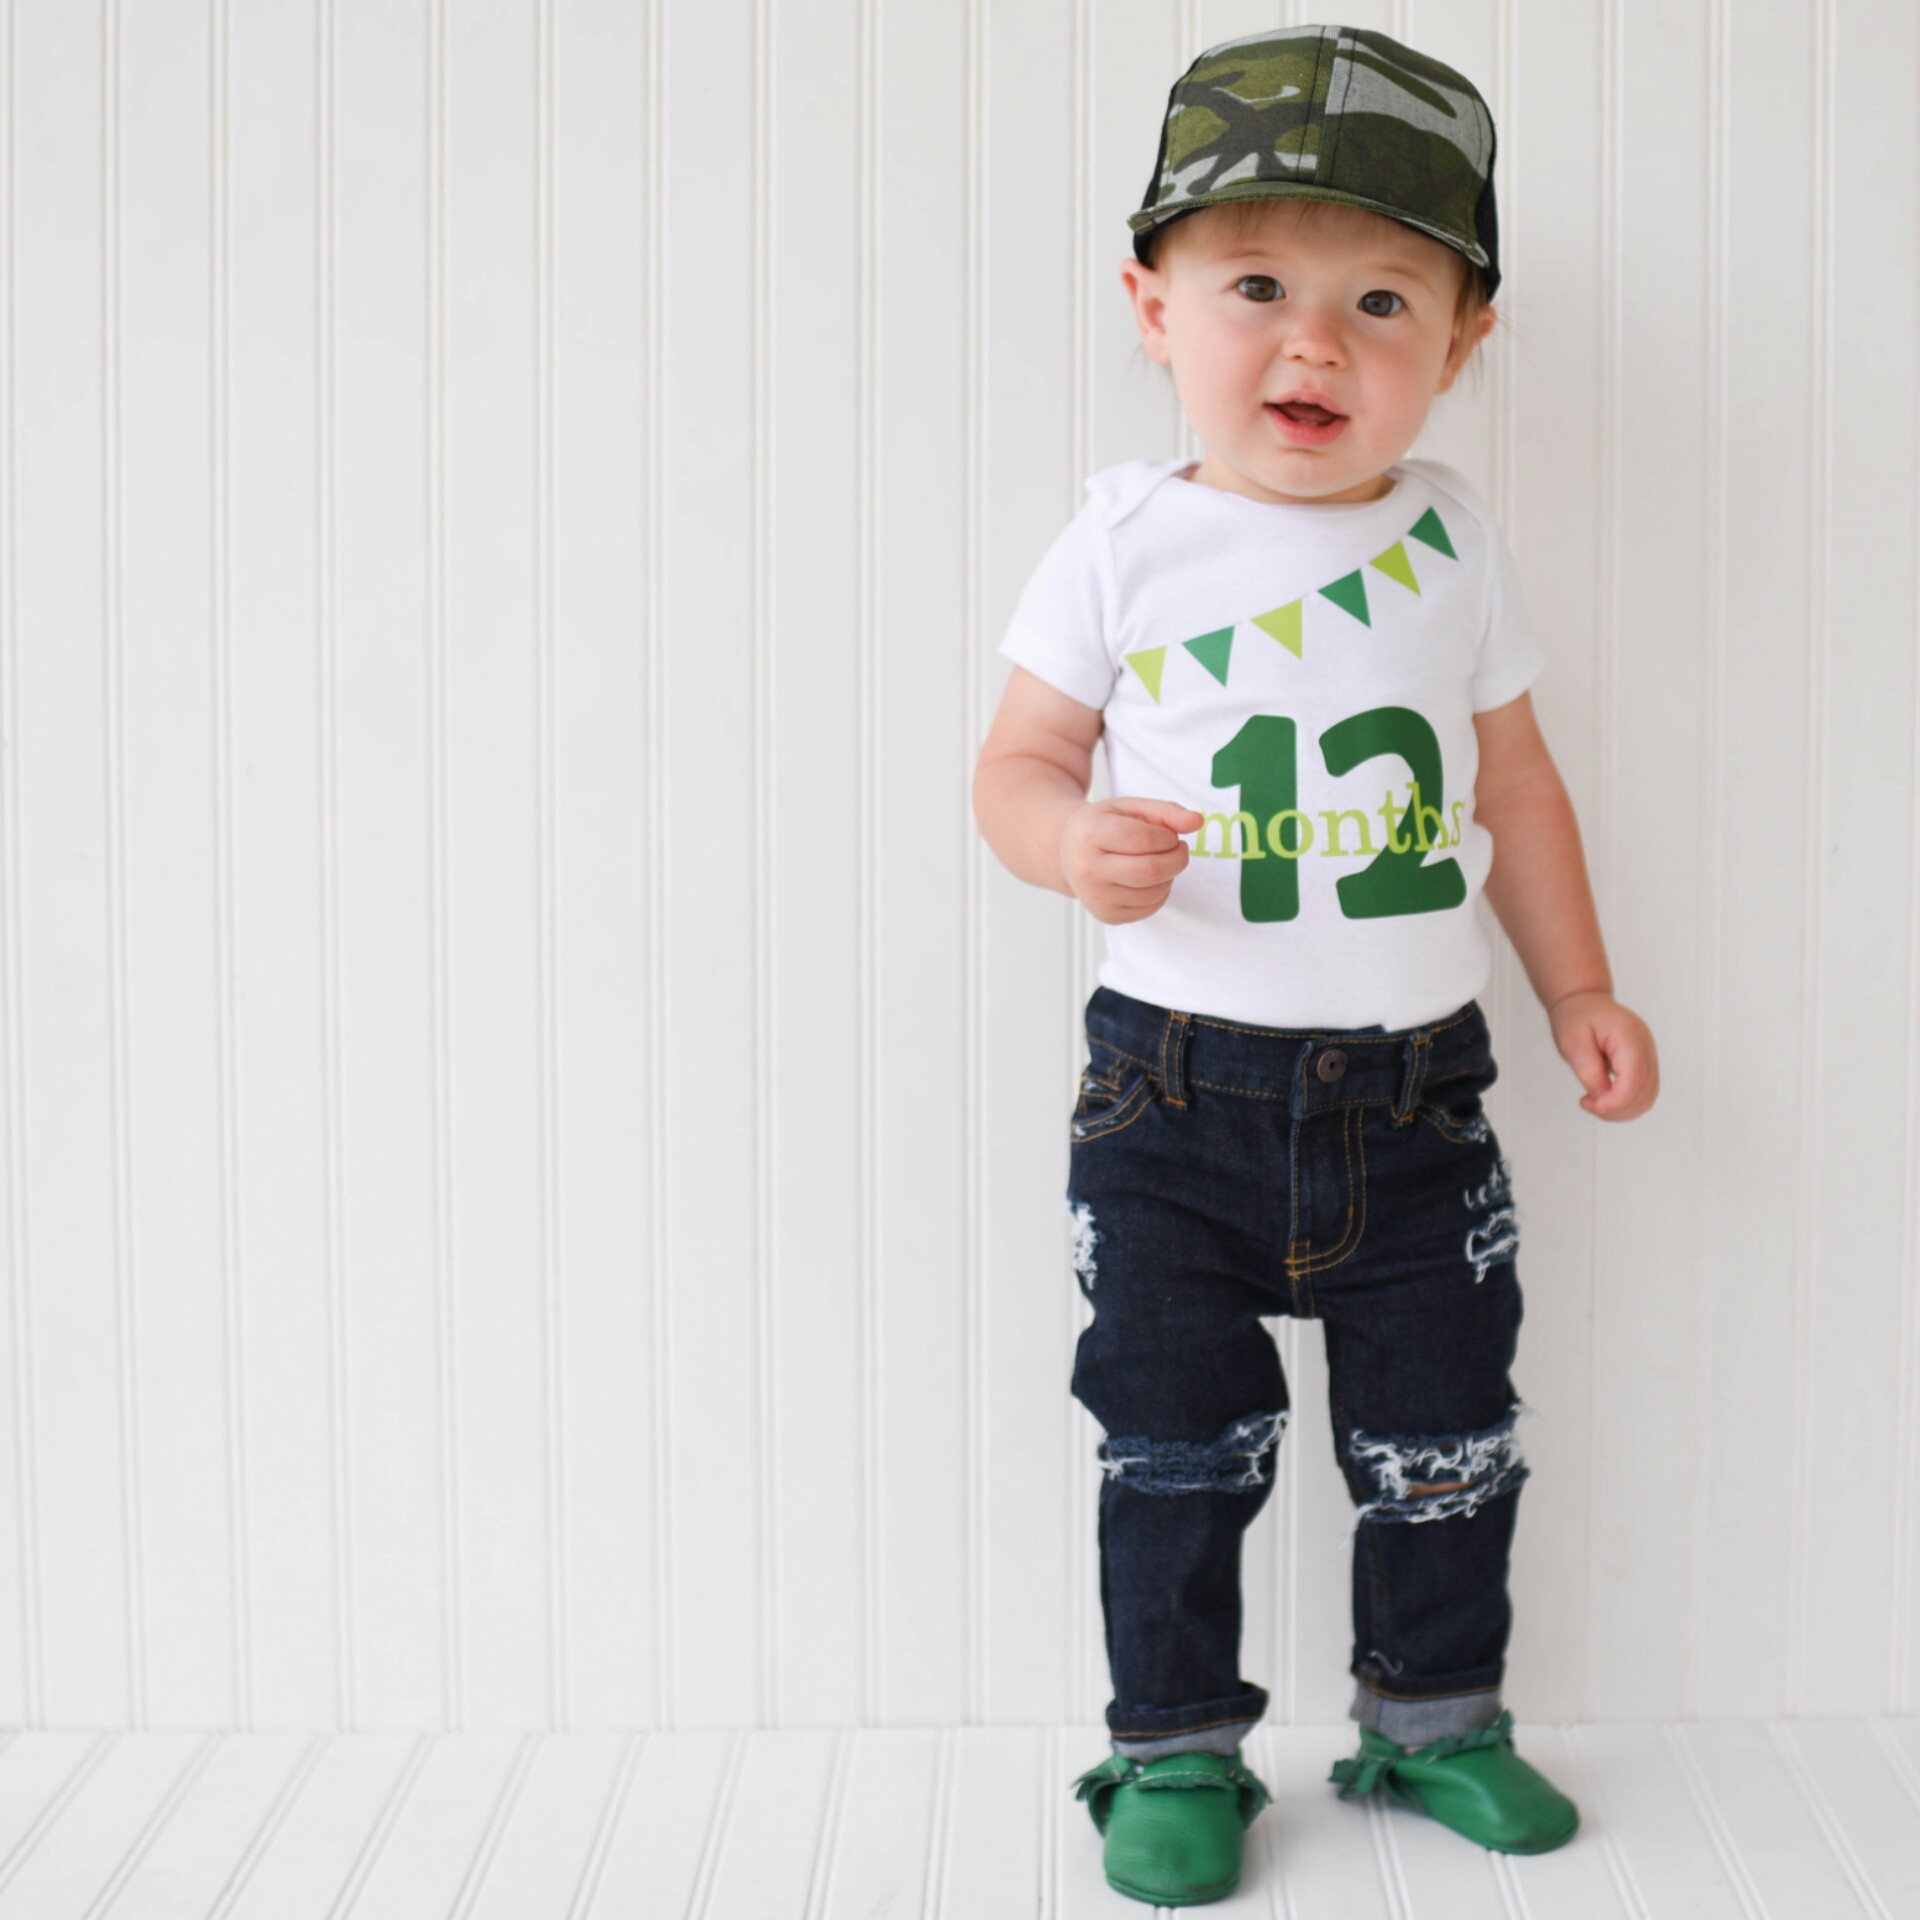 One Year Old Boy Birthday Outfit - 12 